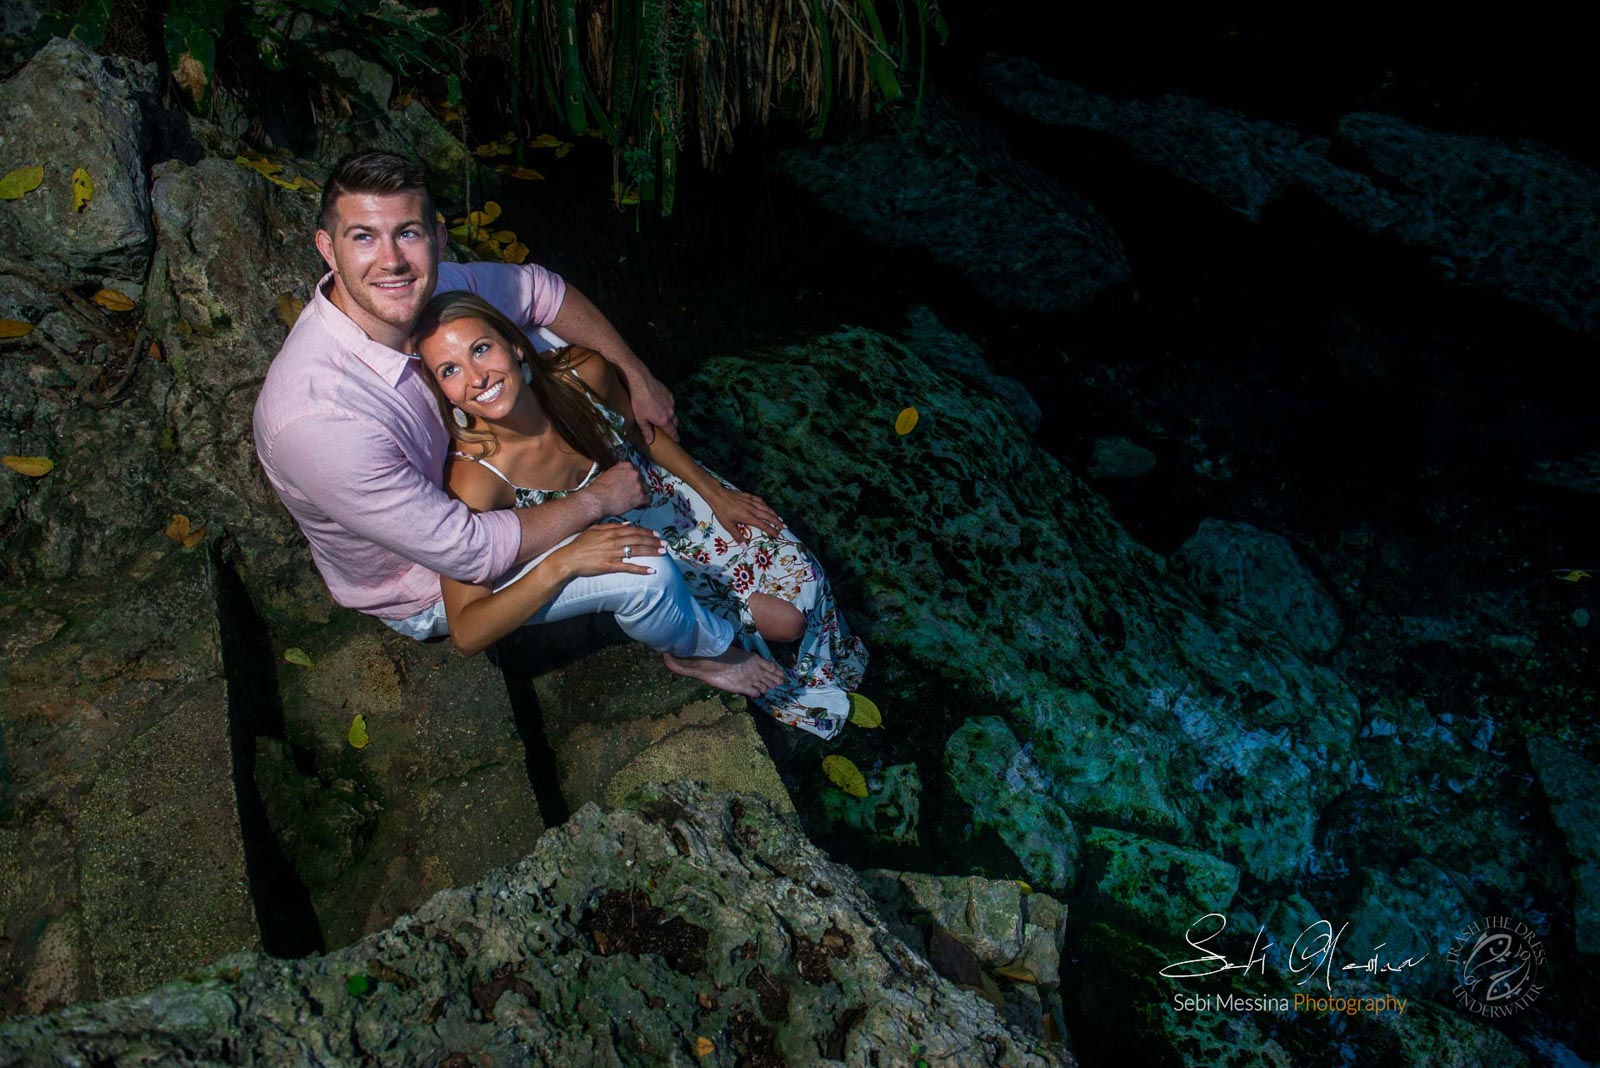 Engagement pictures in a cenote (Mexico) – Images on land